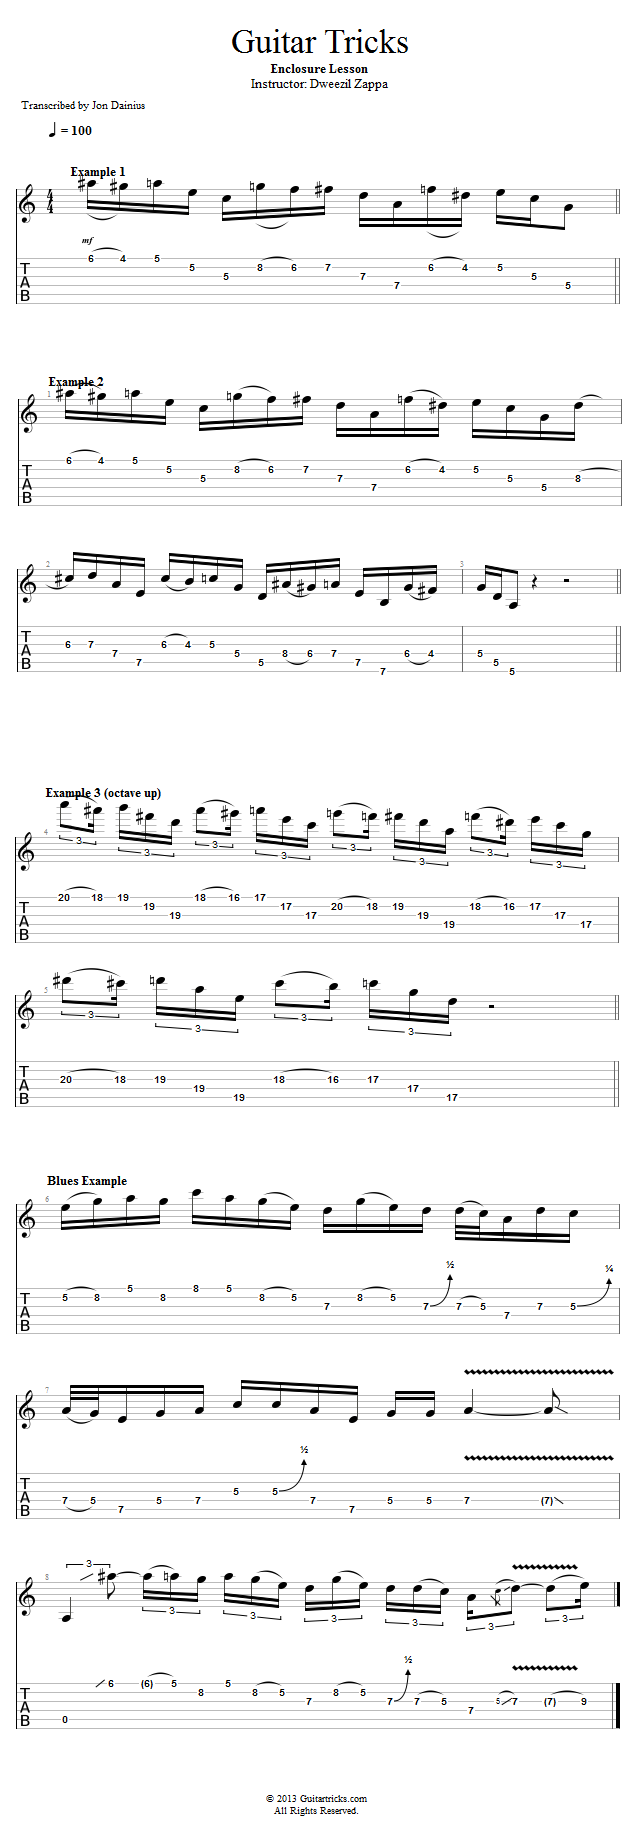 Enclosure Lesson by Dweezil Zappa song notation